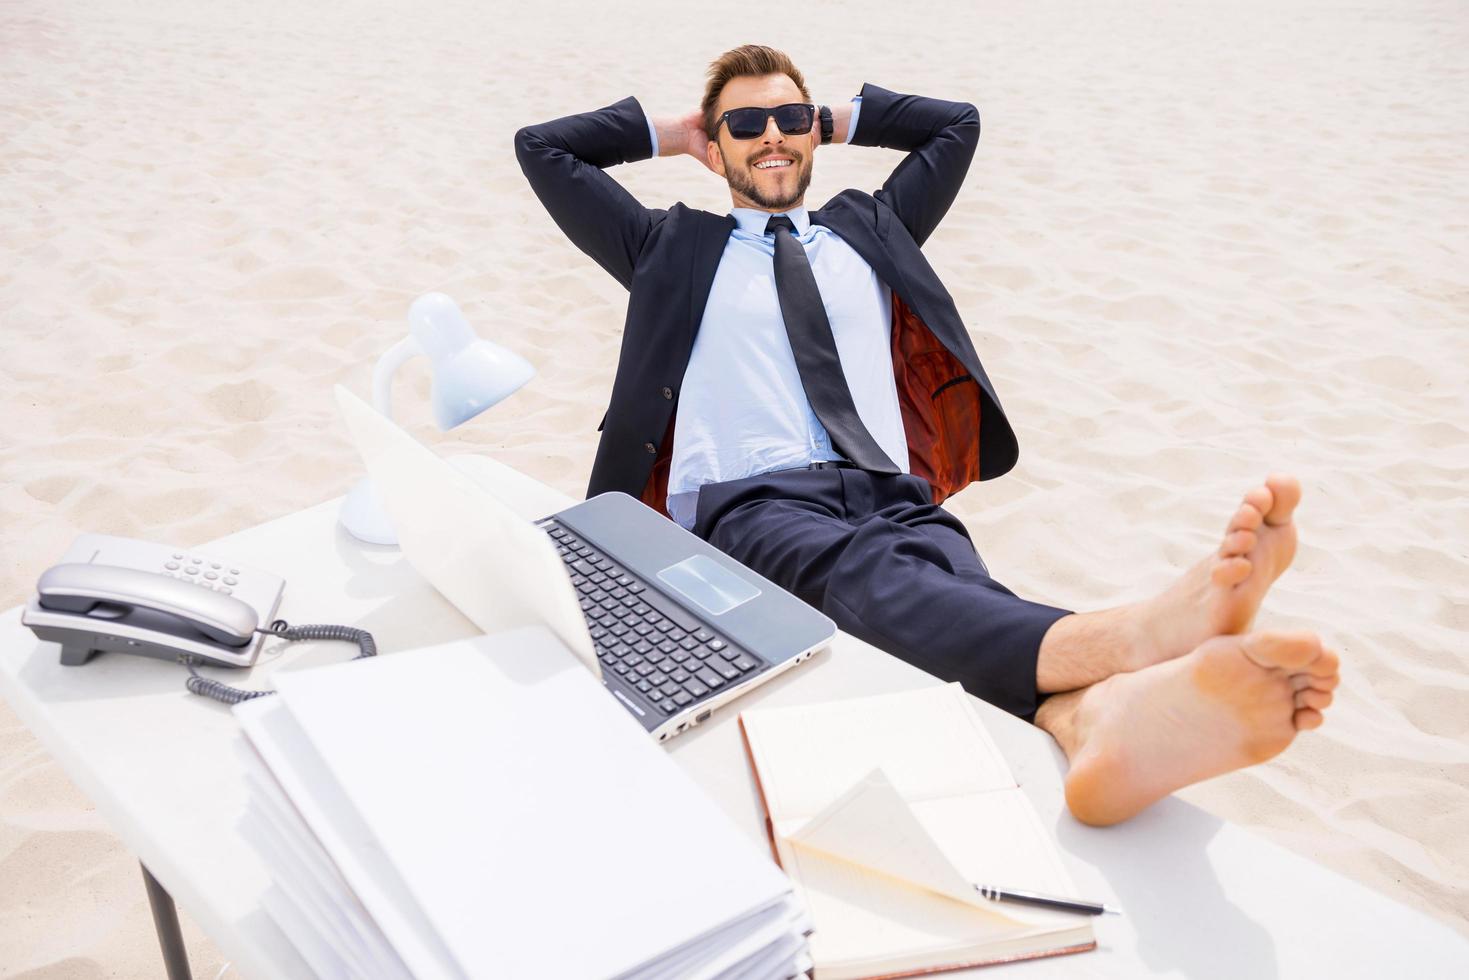 Total relaxation. Top view of relaxed young man in formalwear and sunglasses holding hands behind head and holding his feet on the table standing on sand photo